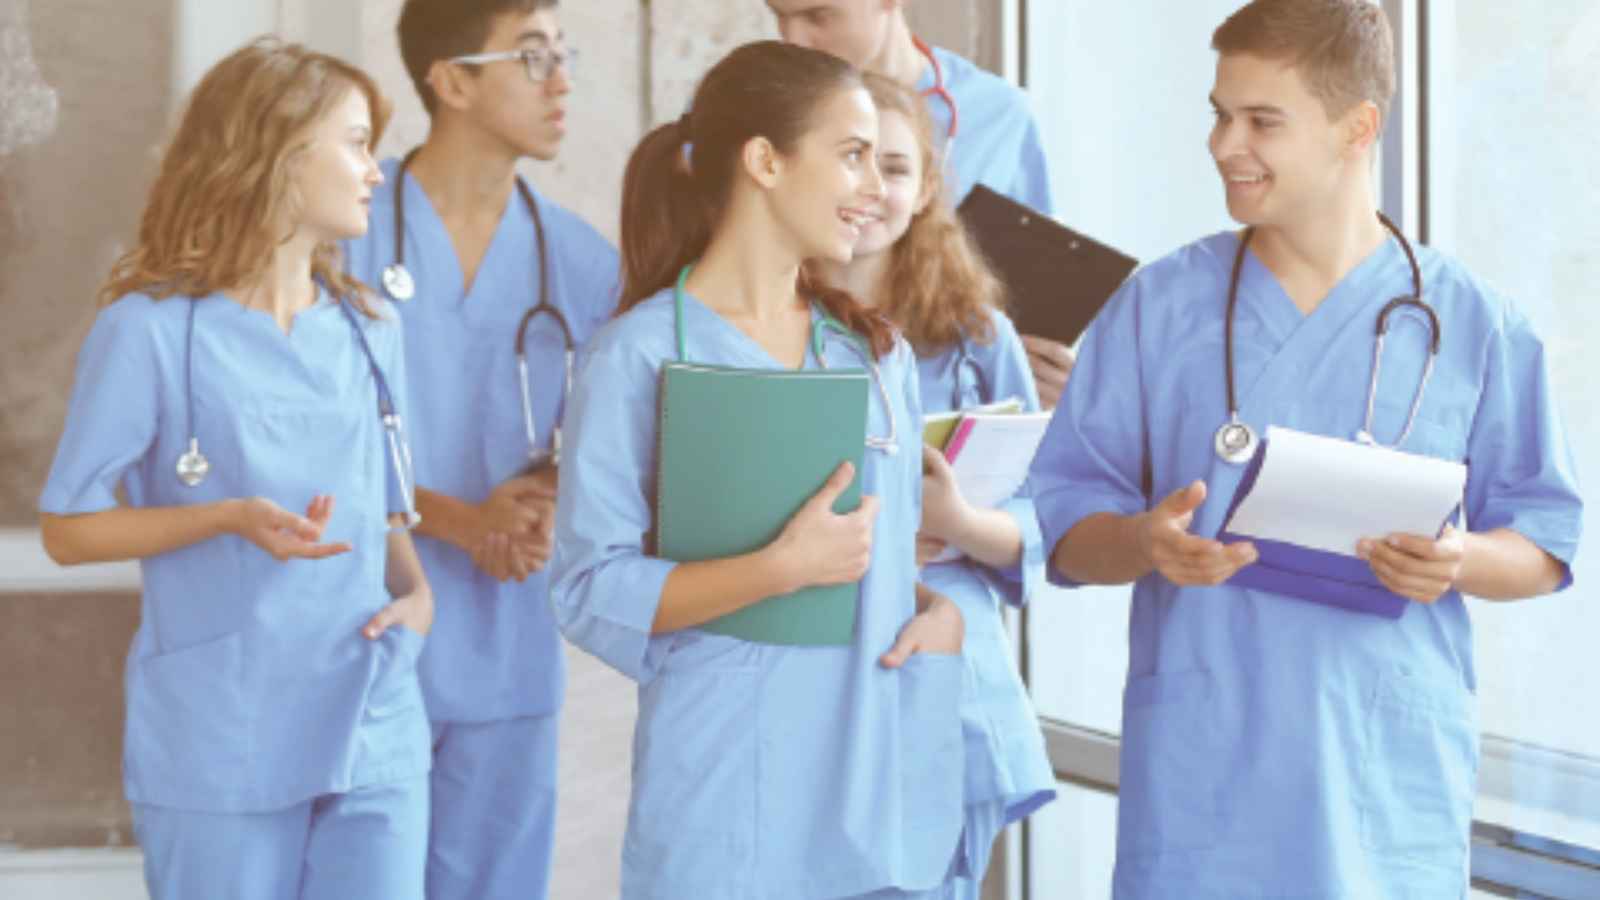 National Student Nurse Day 2023: Date, History, Facts about Nursing